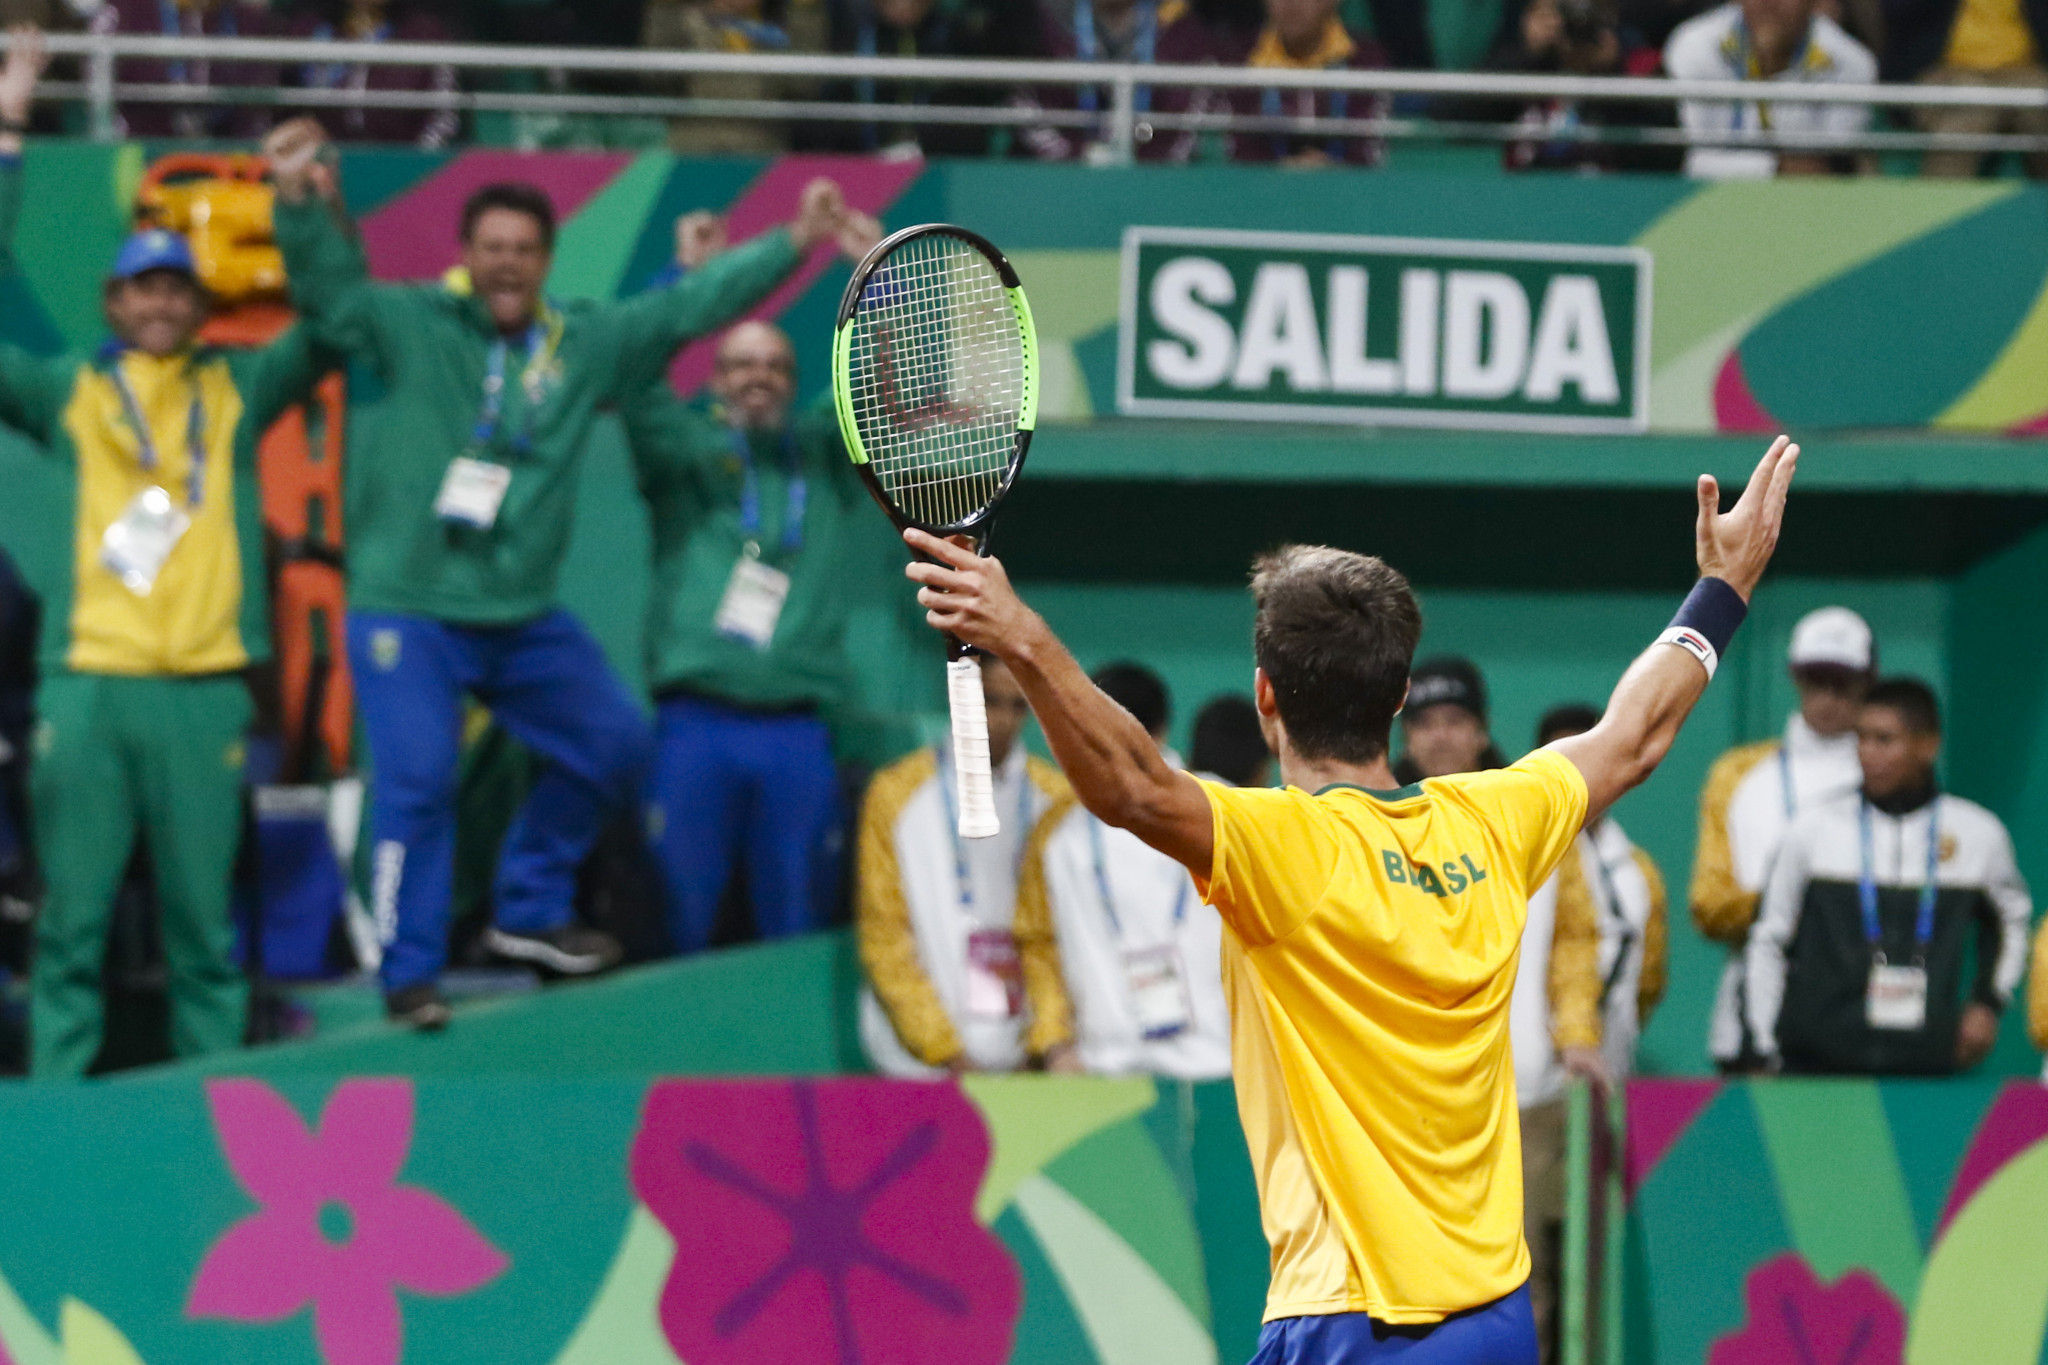 Brazil moved further up the medal table as Joao Menezes triumphed in the men's tennis singles ©Lima 2019